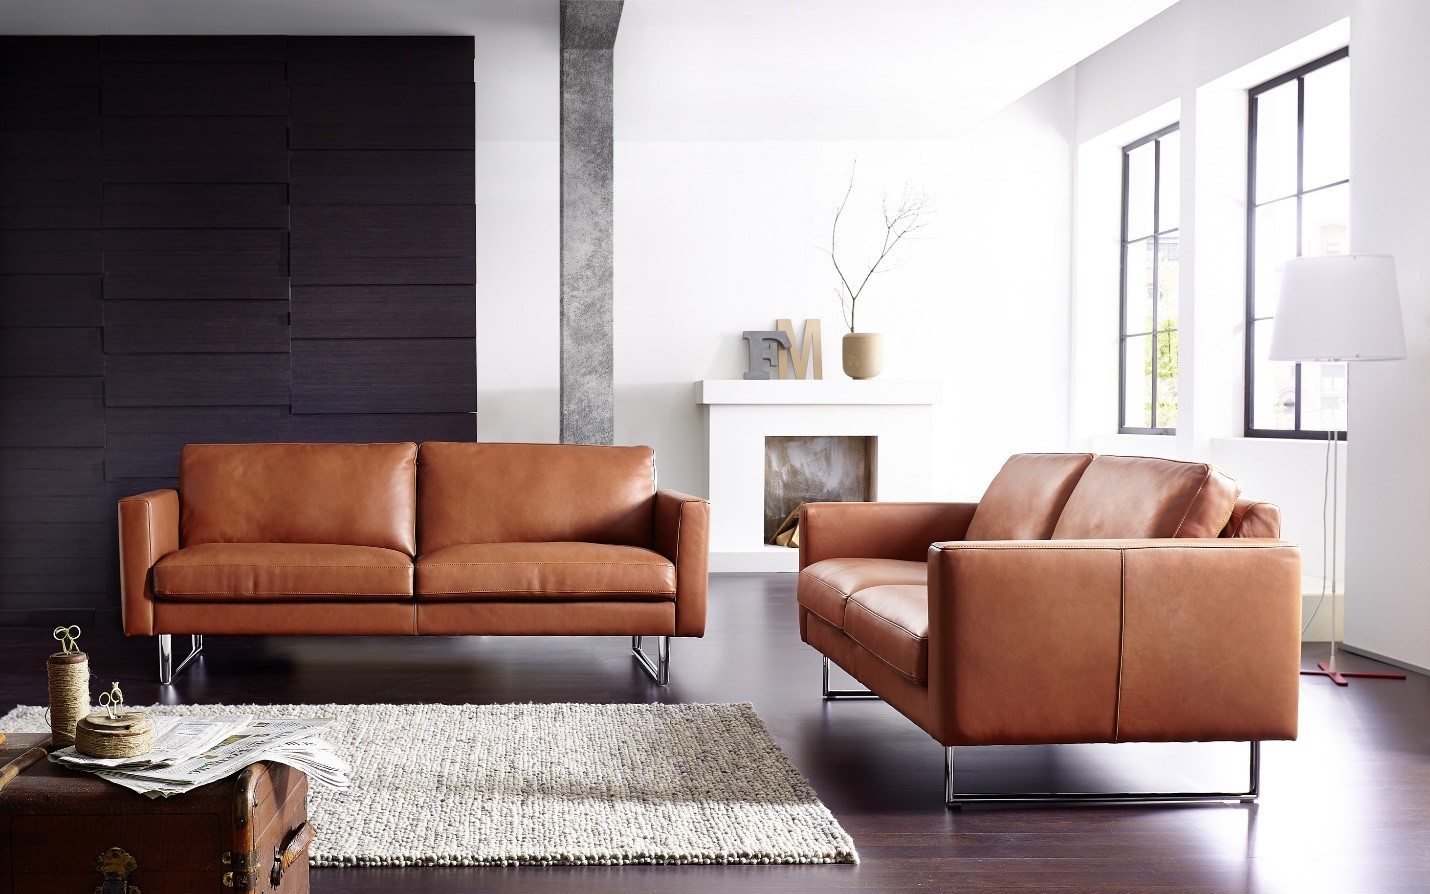 How to decorate a brown sofa and dark flooring - Quora